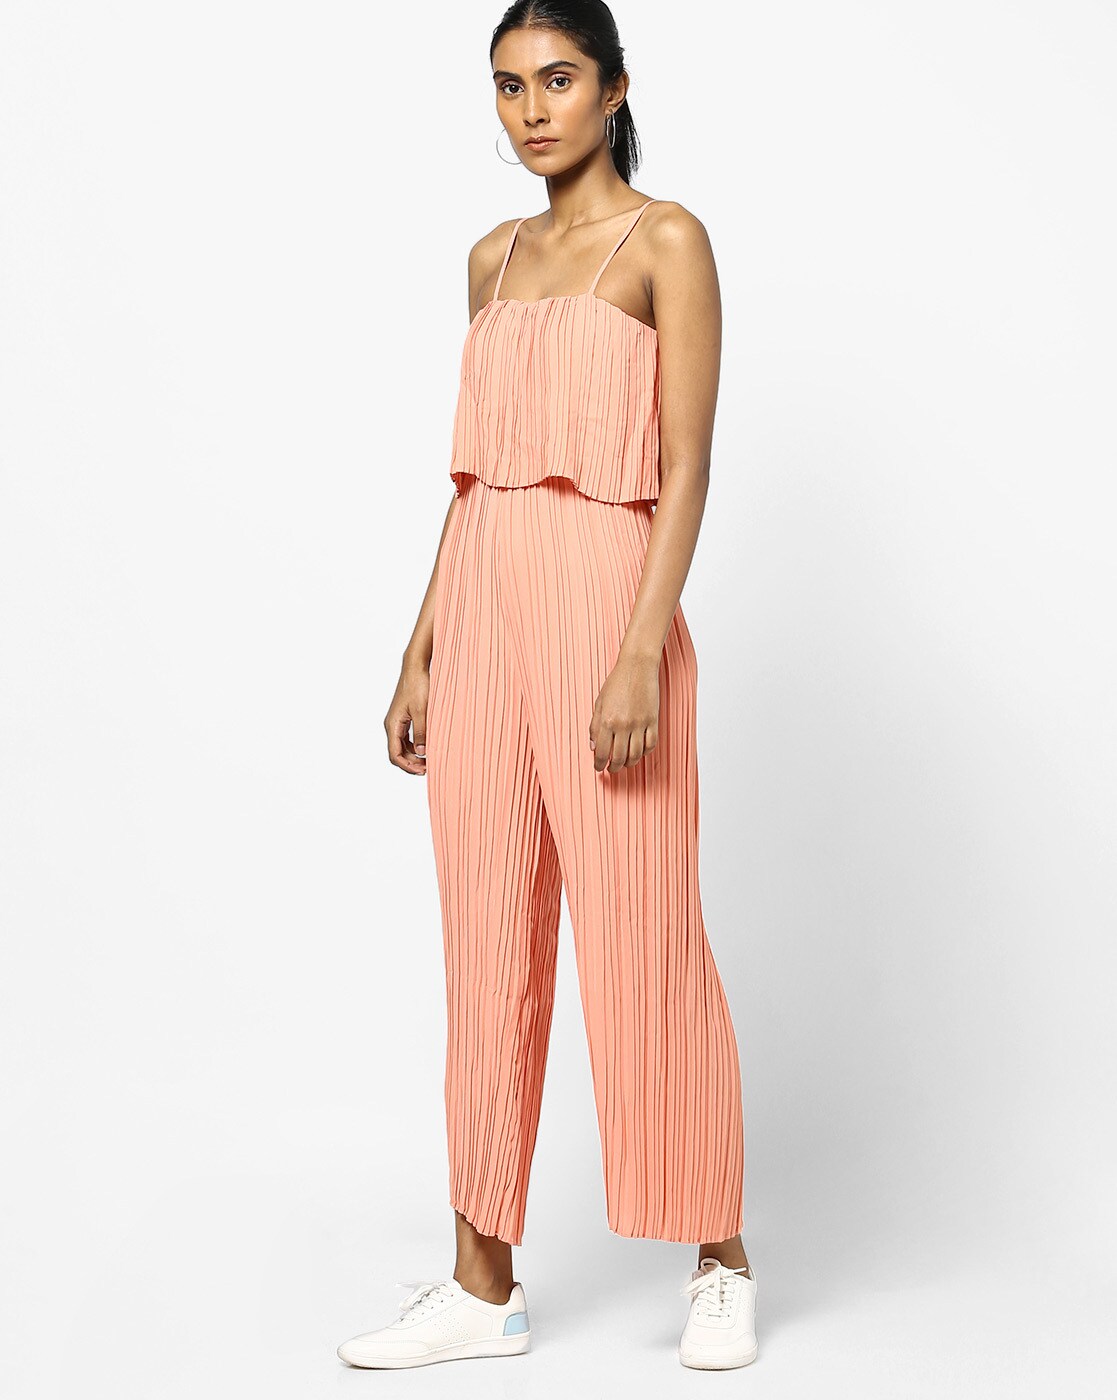 Gajra Gang Amaira Pink Sequinned Jumpsuit: Buy Gajra Gang Amaira Pink  Sequinned Jumpsuit Online at Best Price in India | Nykaa